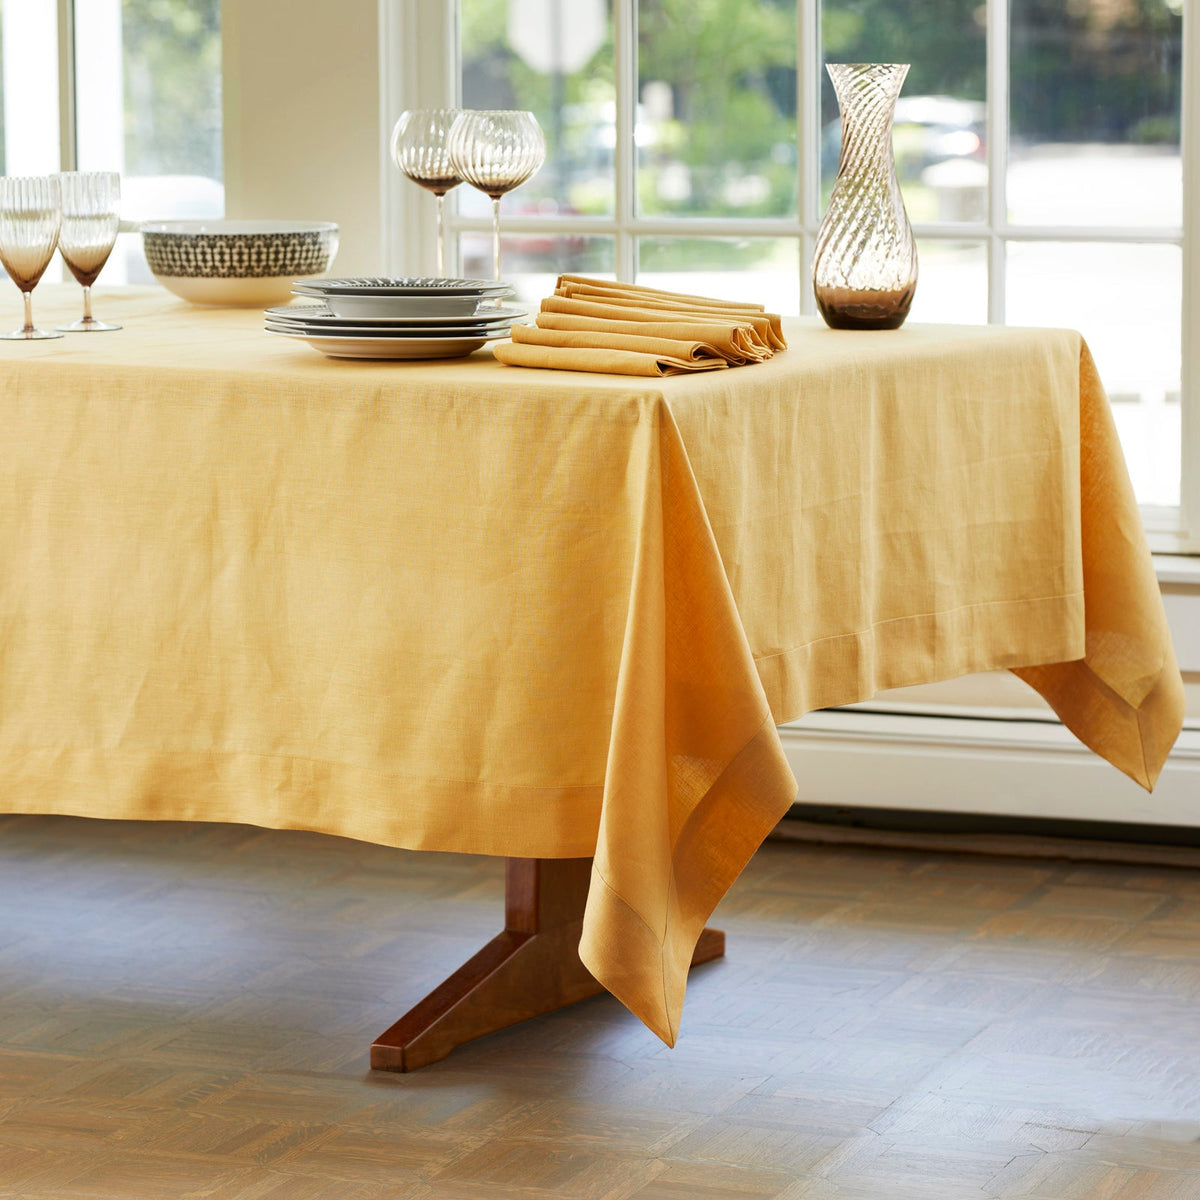 A Marigold Linen Tablecloth and Napkin Set made sustainably from linen sourced from an Italian mill, draped gracefully on a wooden table.